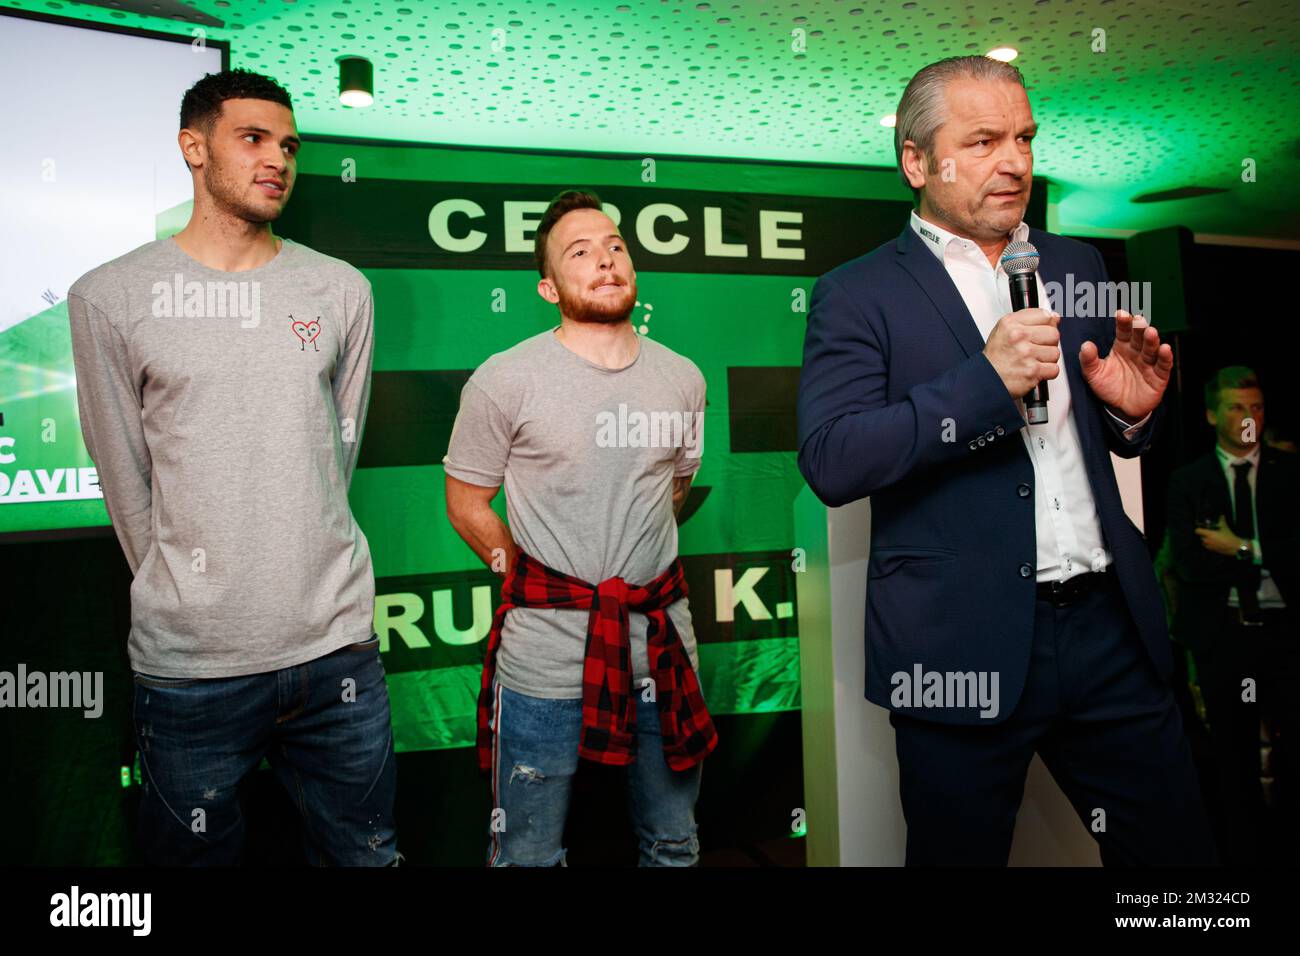 Cercle's new player Isaac Christie-Davies, Cercle's new player Dino Hotic and Cercle's head coach Bernd Storck pictured during the new year's reception of Belgian first division soccer team Cercle Brugge KSV, with their new chairman, Tuesday 14 January 2020 in Brugge. BELGA PHOTO KURT DESPLENTER Stock Photo